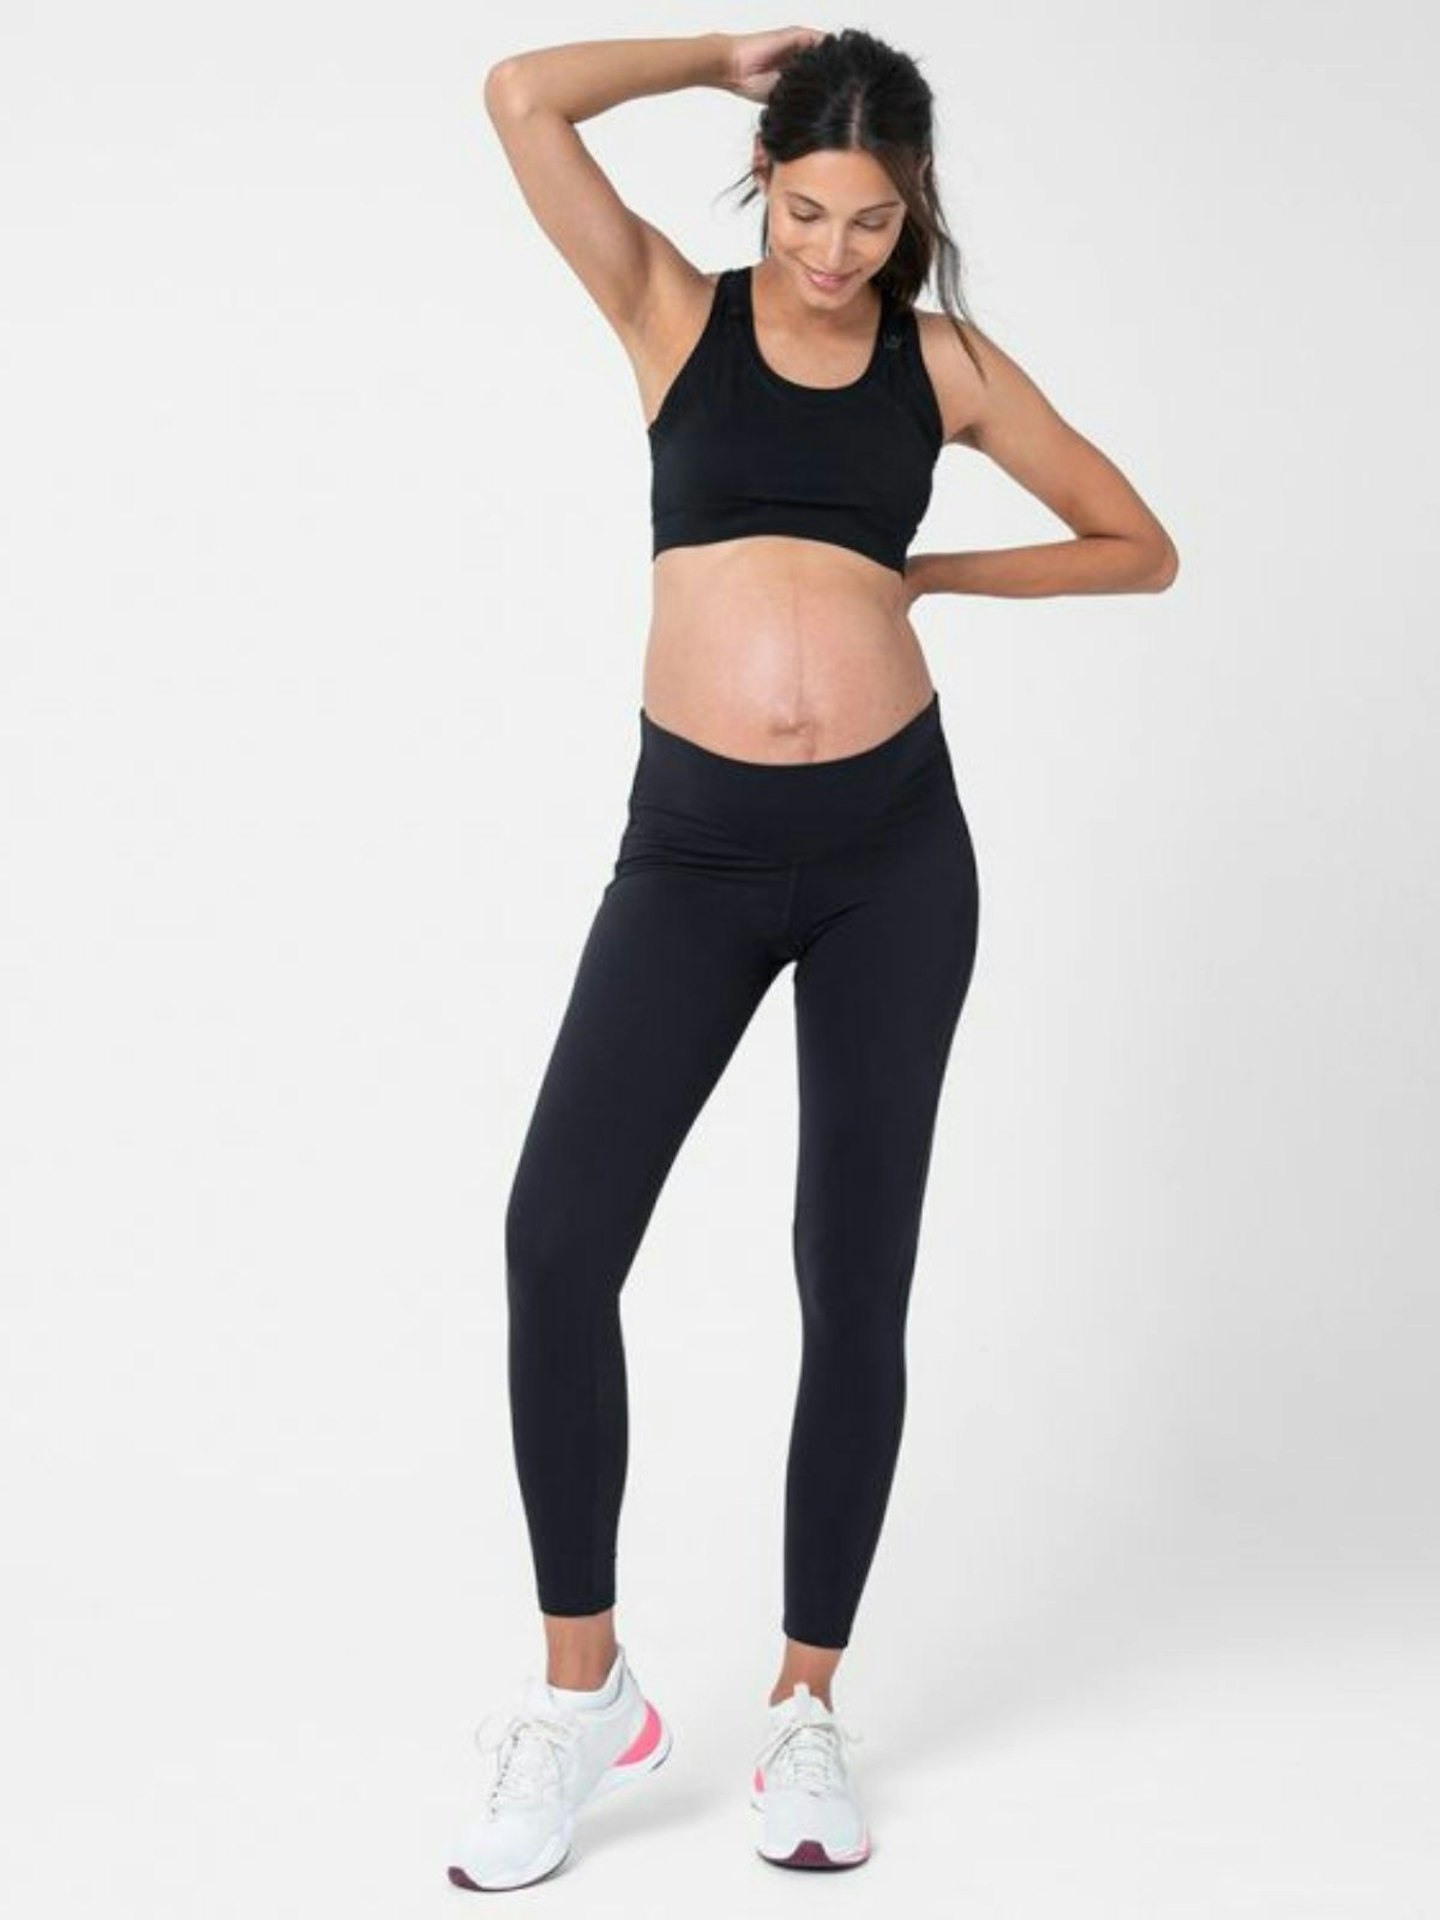  Enerful Womens Maternity Workout Leggings Over The Belly  Pregnancy Active Wear Athletic Yoga Pants